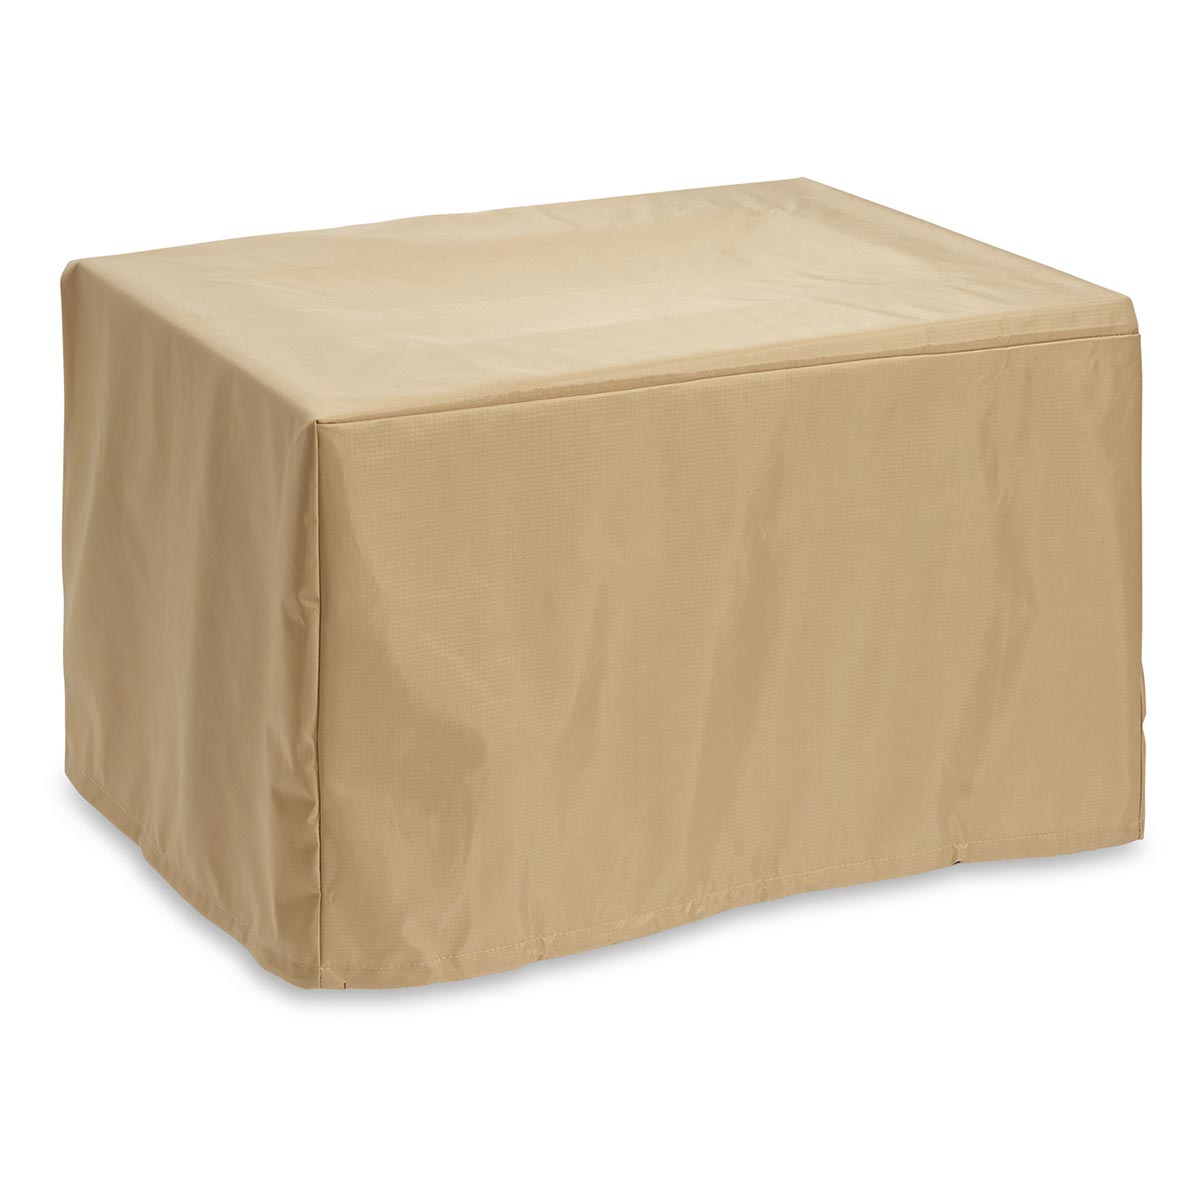 Weather-resistant Protective Cover for Caden, Darien, and Havenwood Fire Tables CVR4634